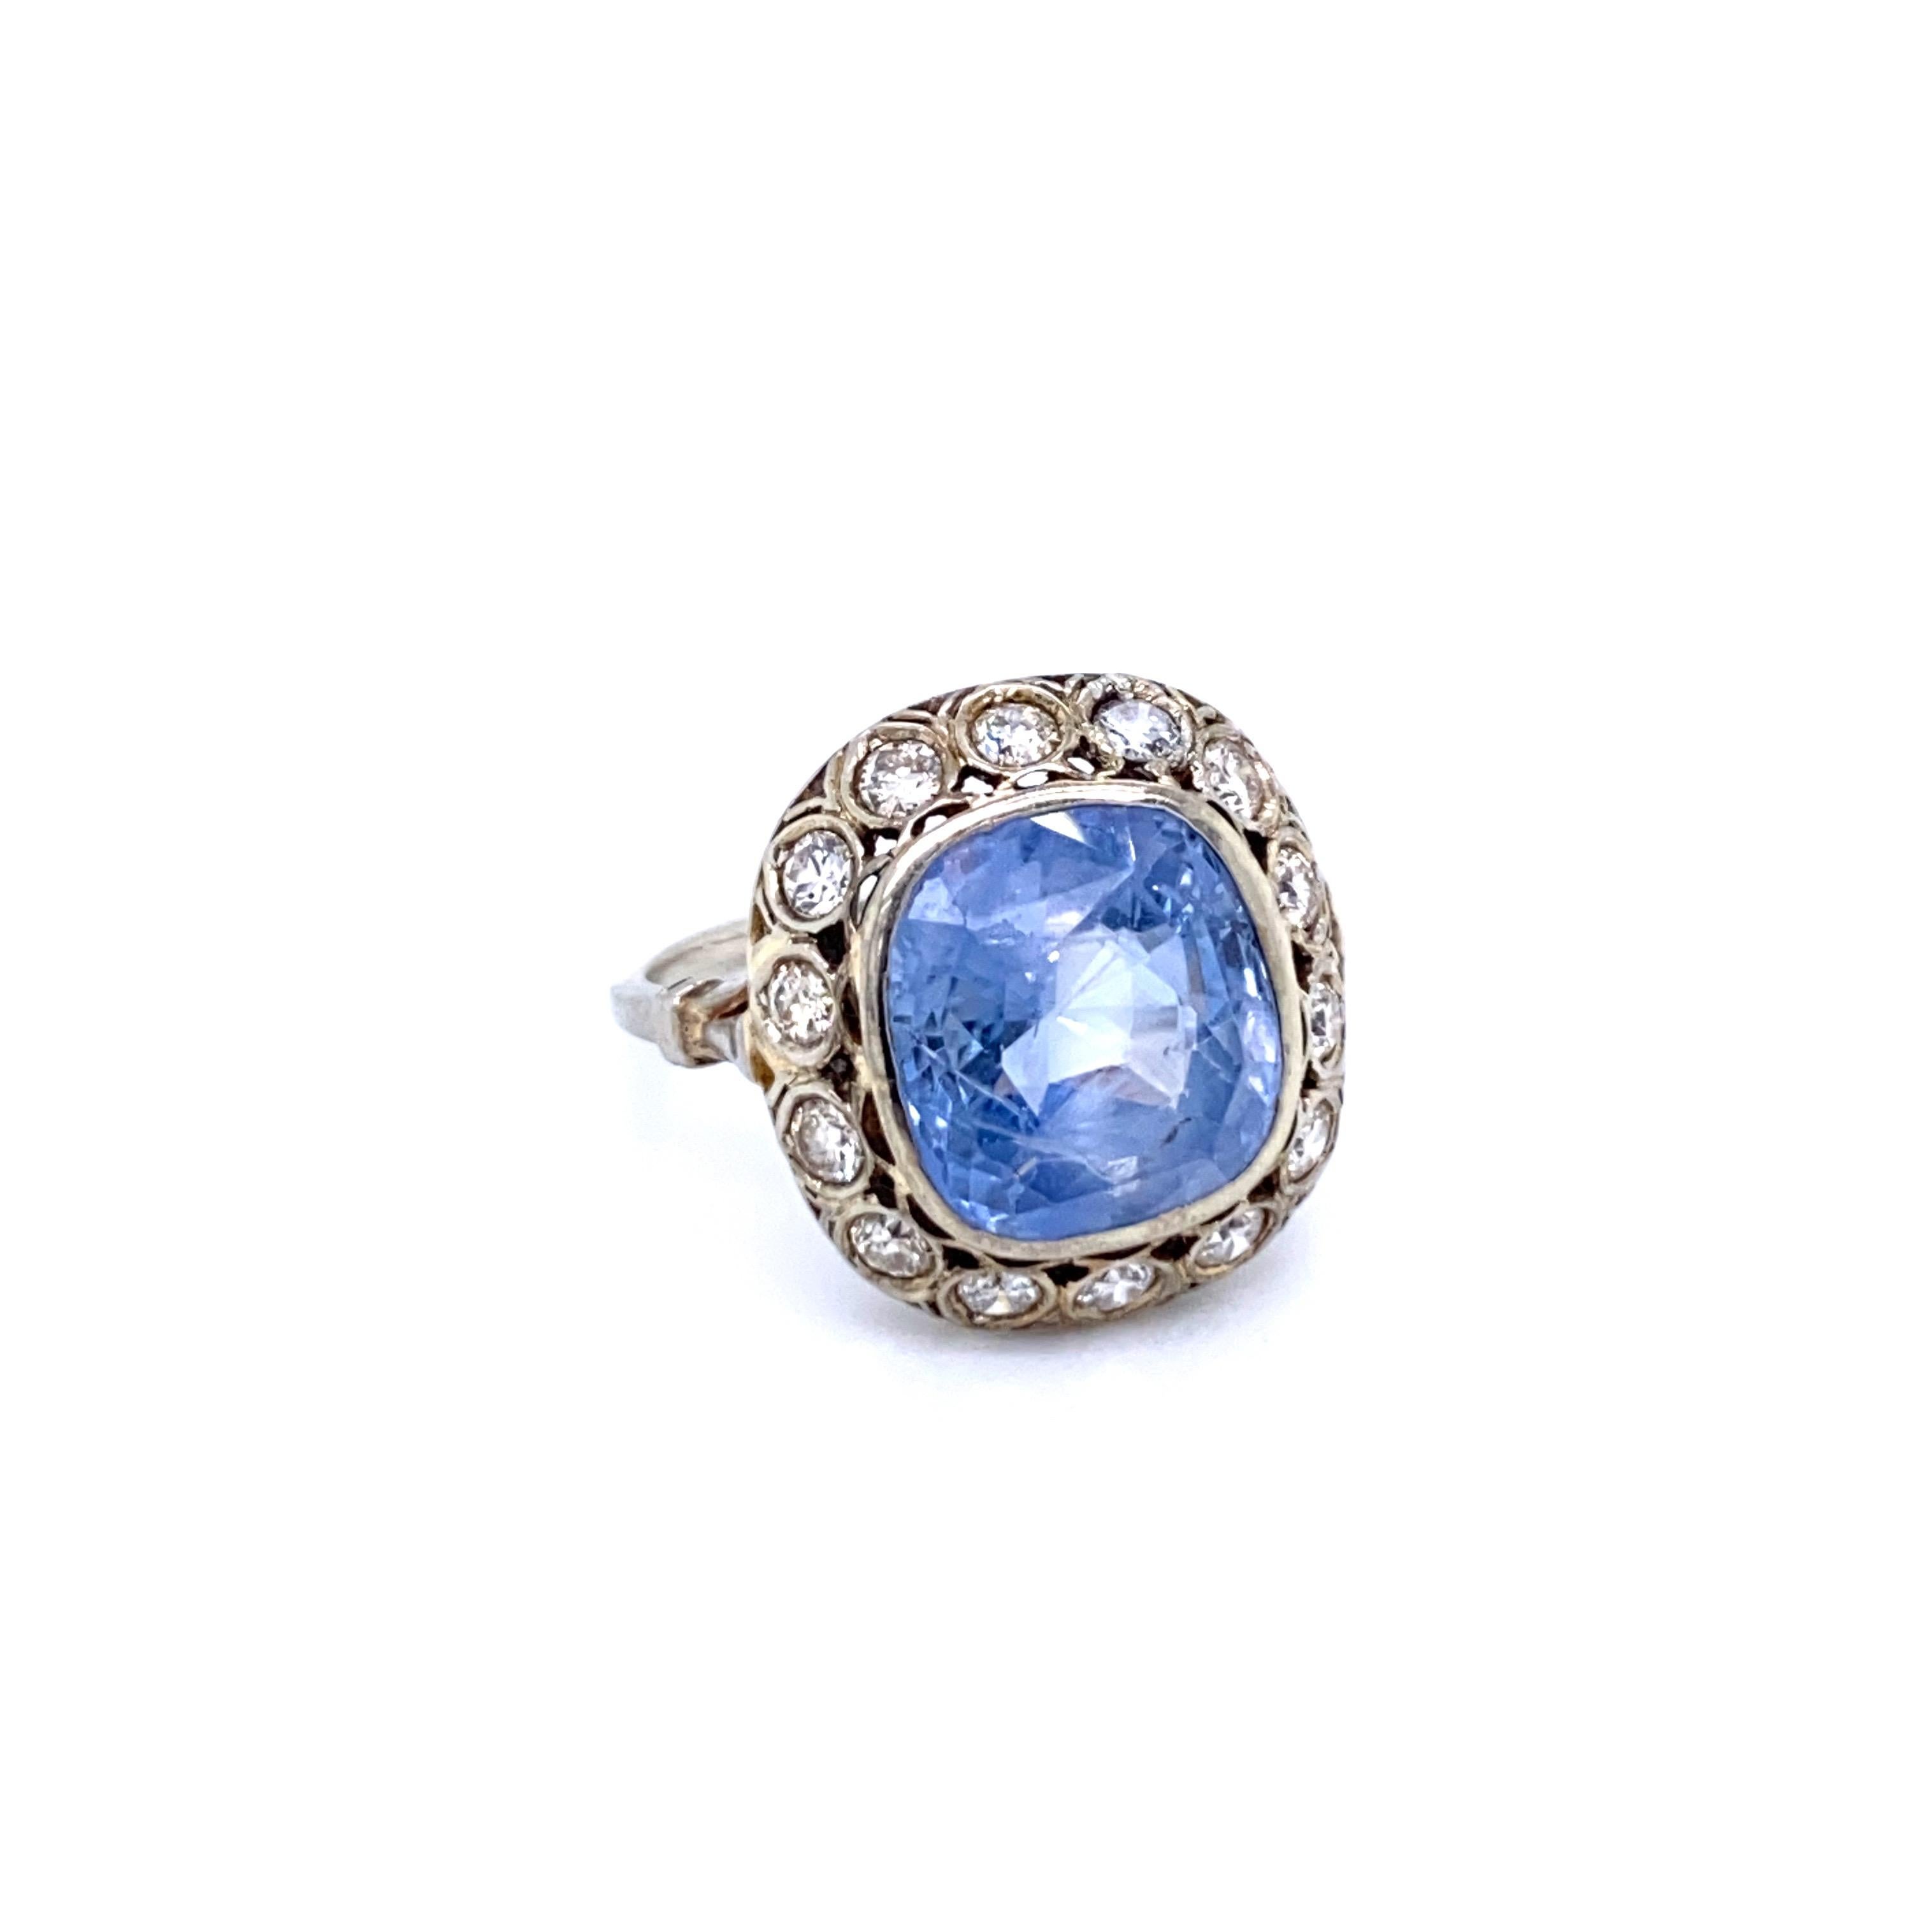 Beautiful Victorian engagement ring, featuring in the centre a large Natural Sapphire weighing approx. 5.00 carat and surrounded by 0.70 ct of old mine cut Diamonds graded I color Vvs2, all set in 18k gold. The ring is crafted entirely by hand.